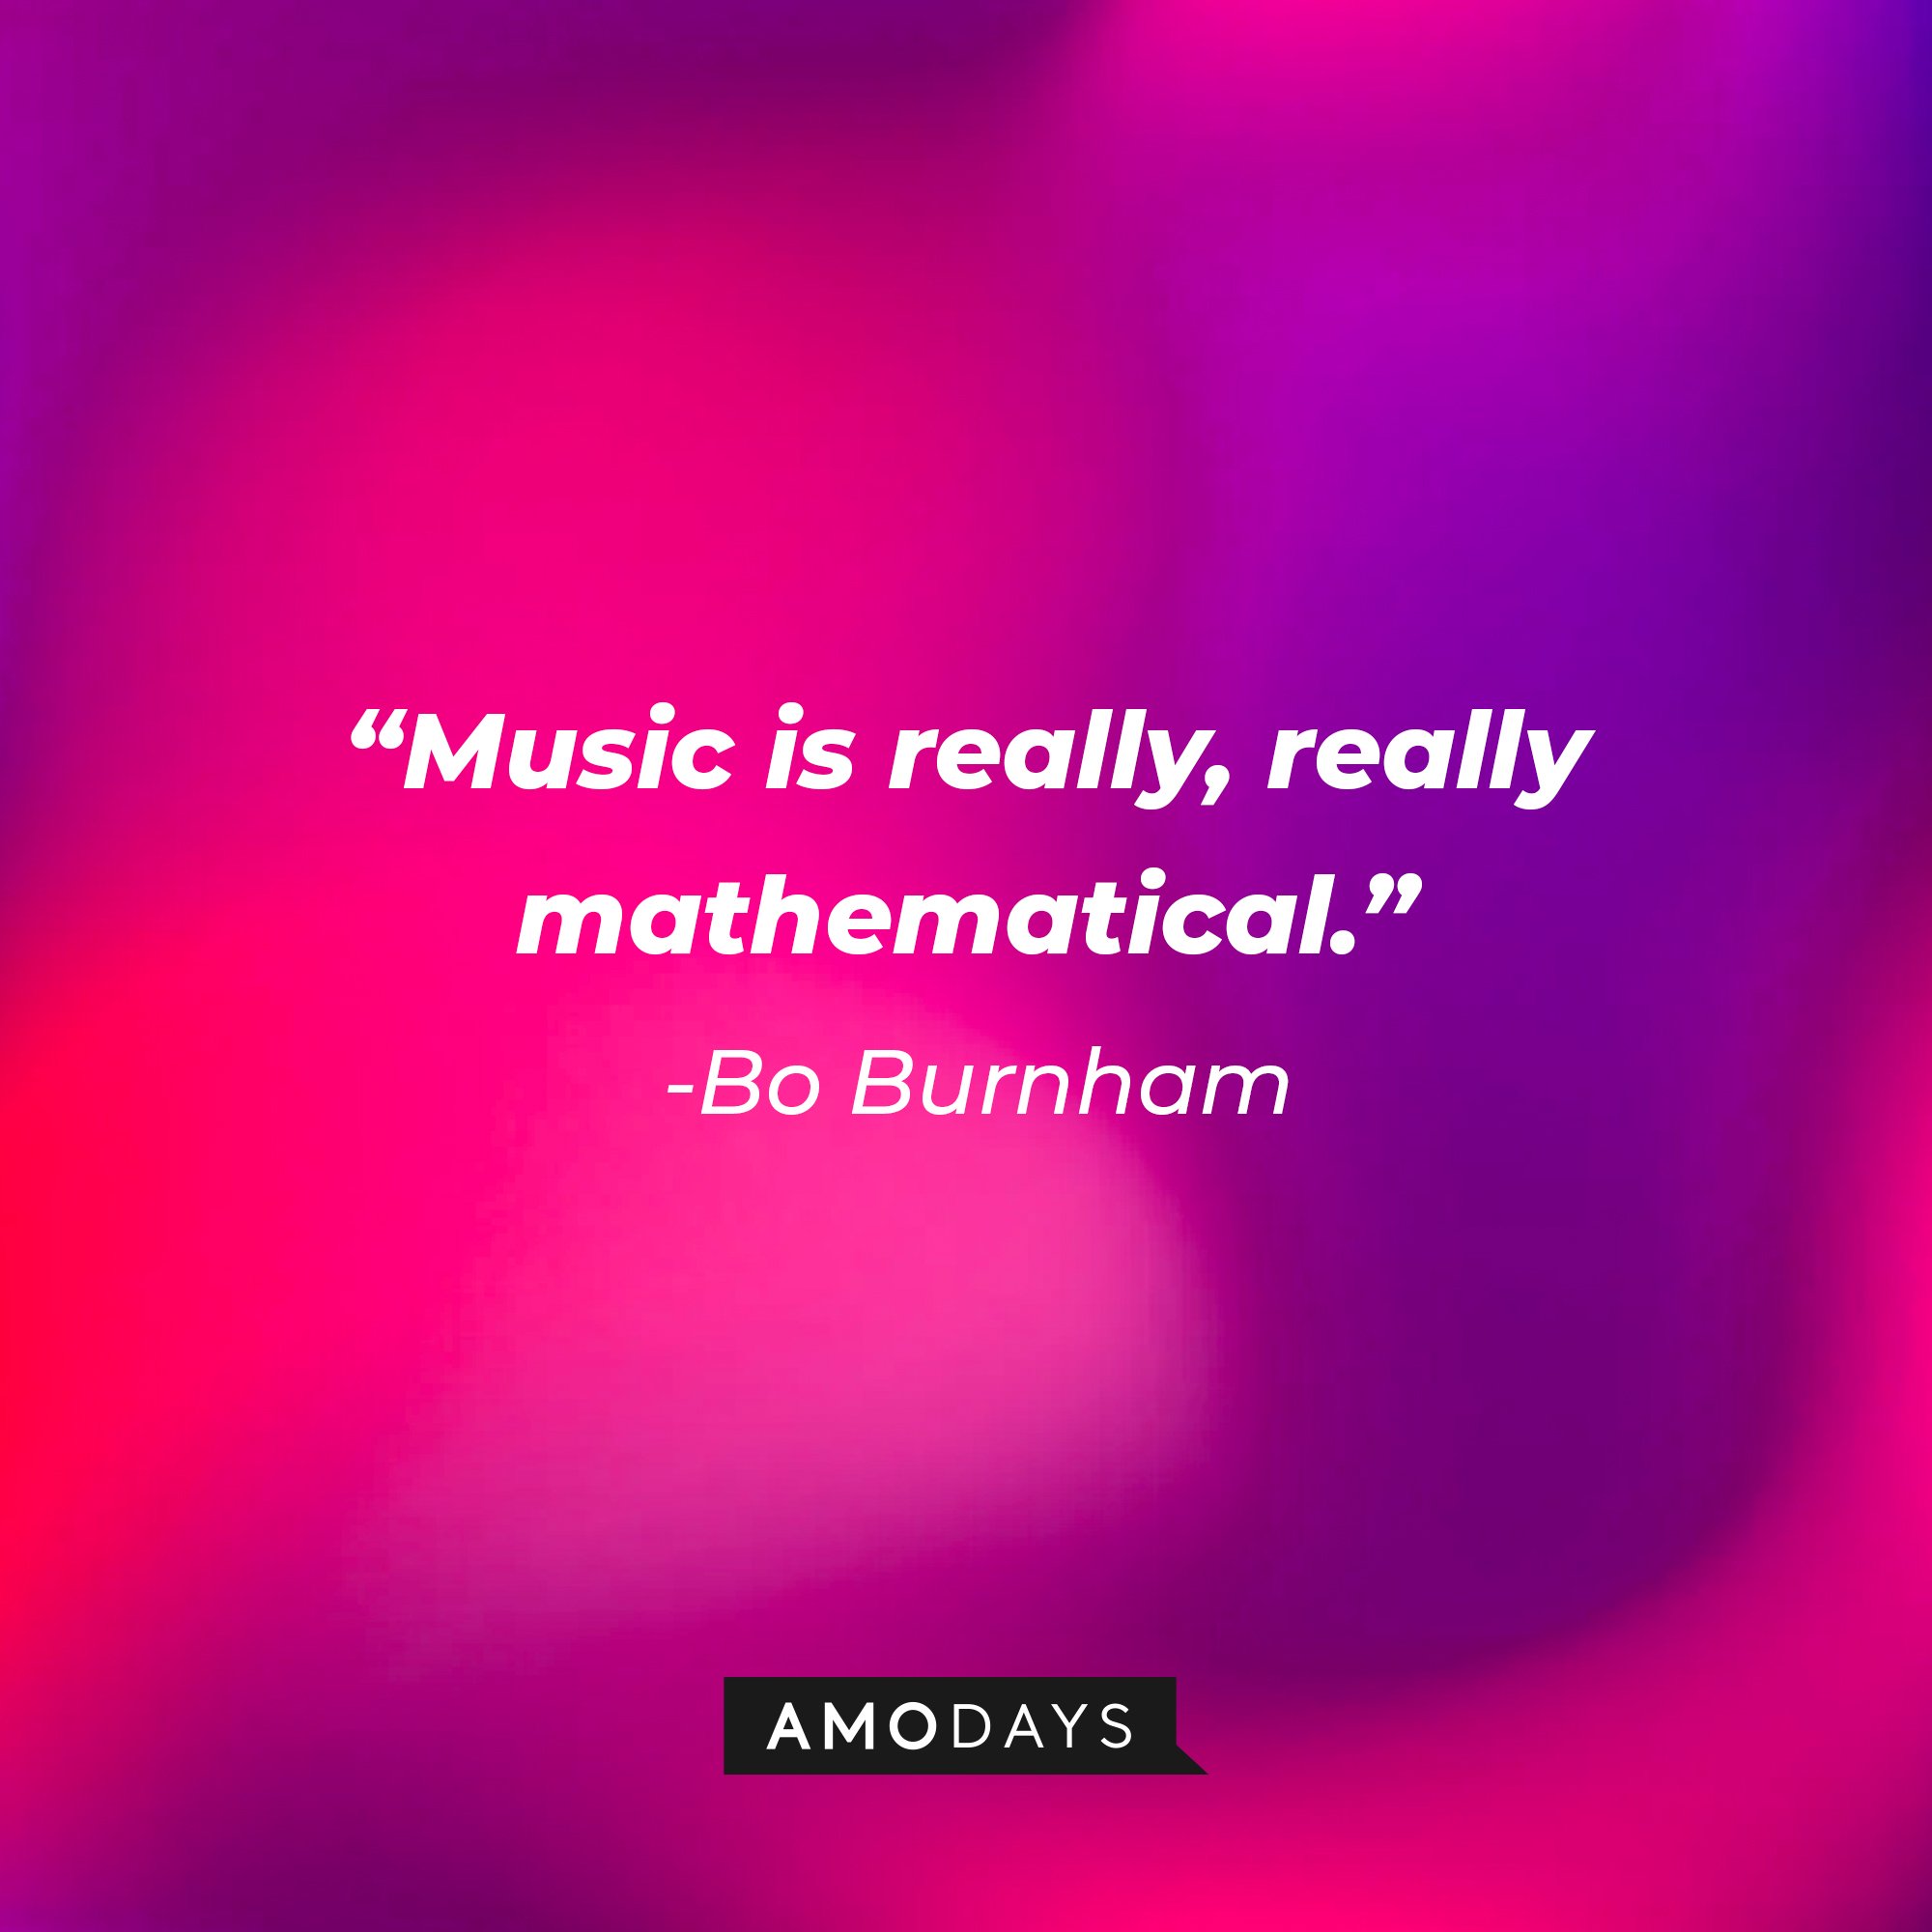 Bo Burnham’s quote: "Music is really, really mathematical." | Image: AmoDays